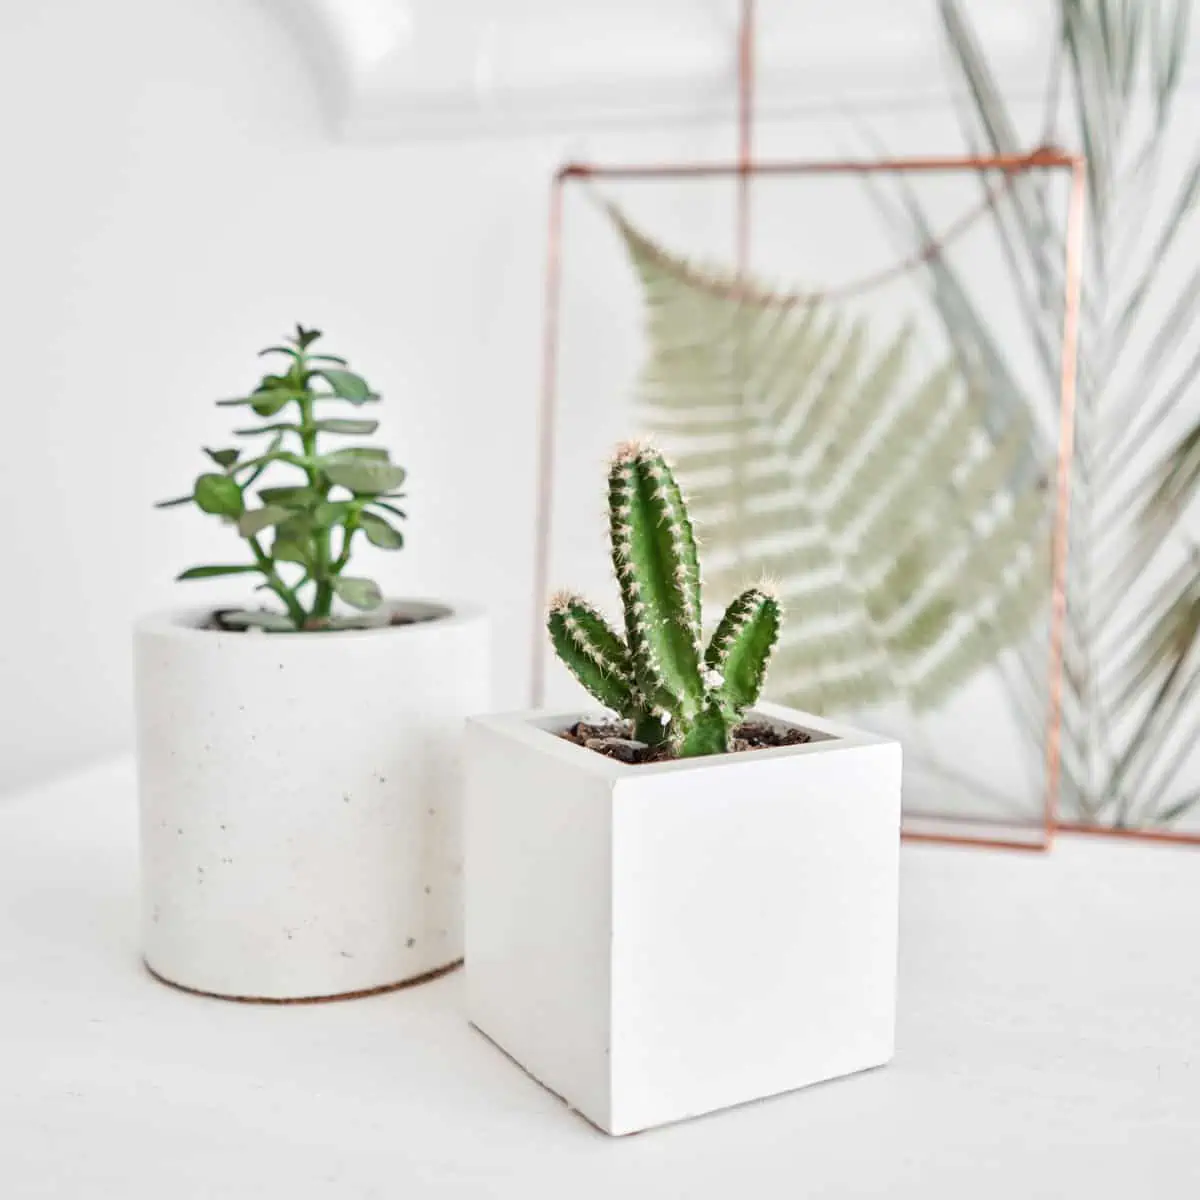 two white concrete planters with plants inside, sitting on a table.